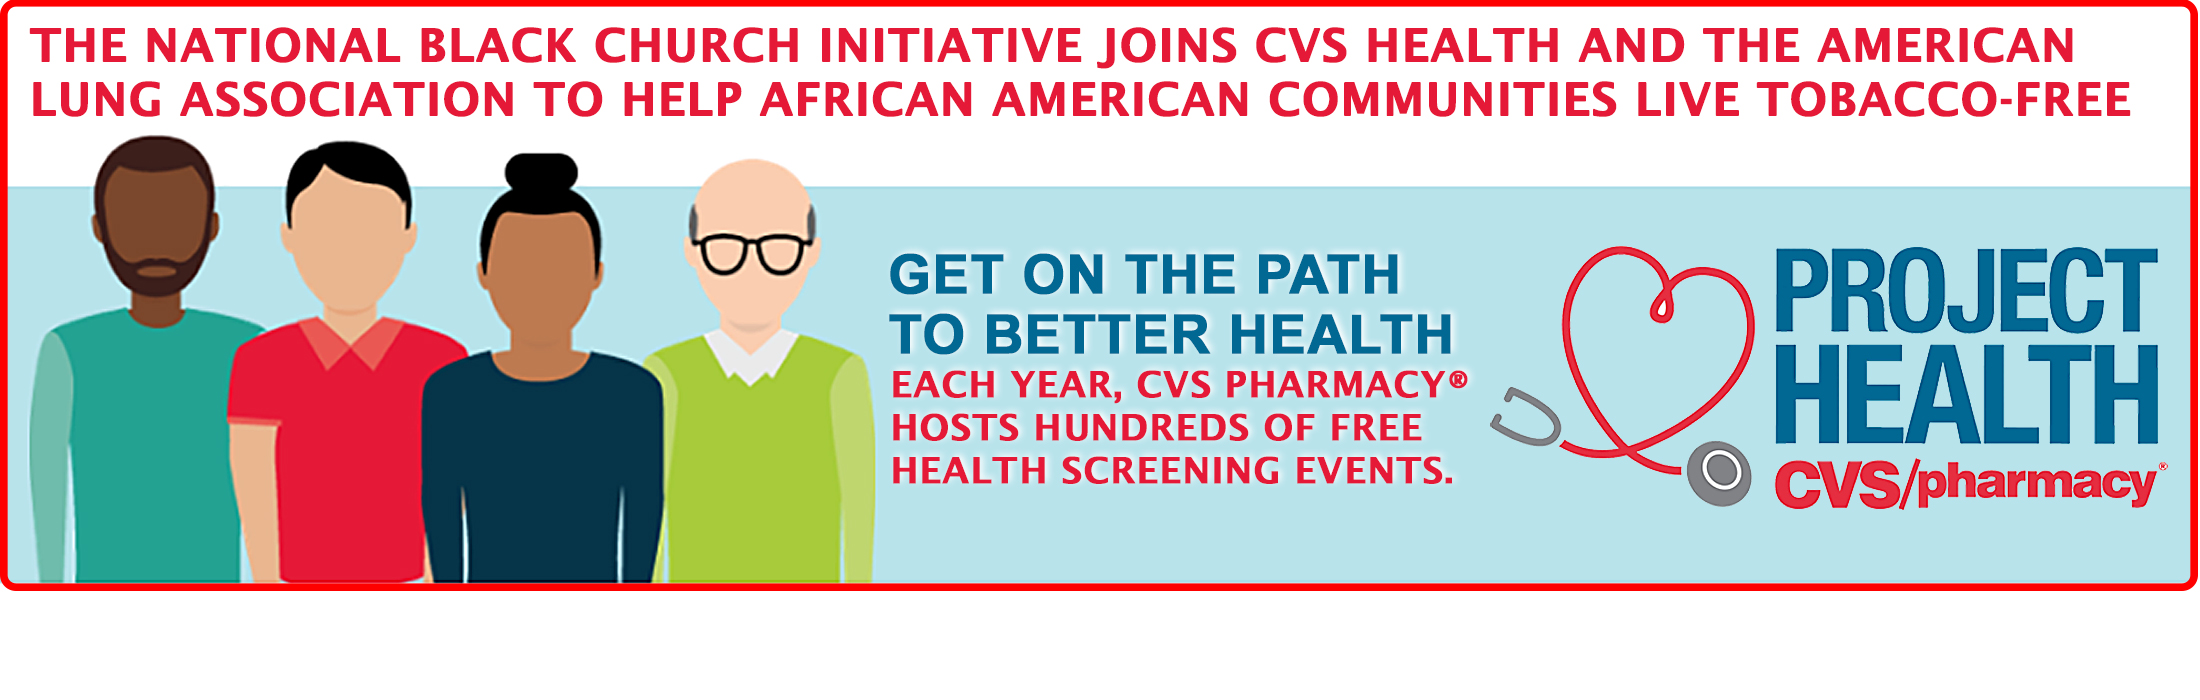 NBCI Joins CVS Health and the American Lung Association To Help African Americans Live Tobacco-Free